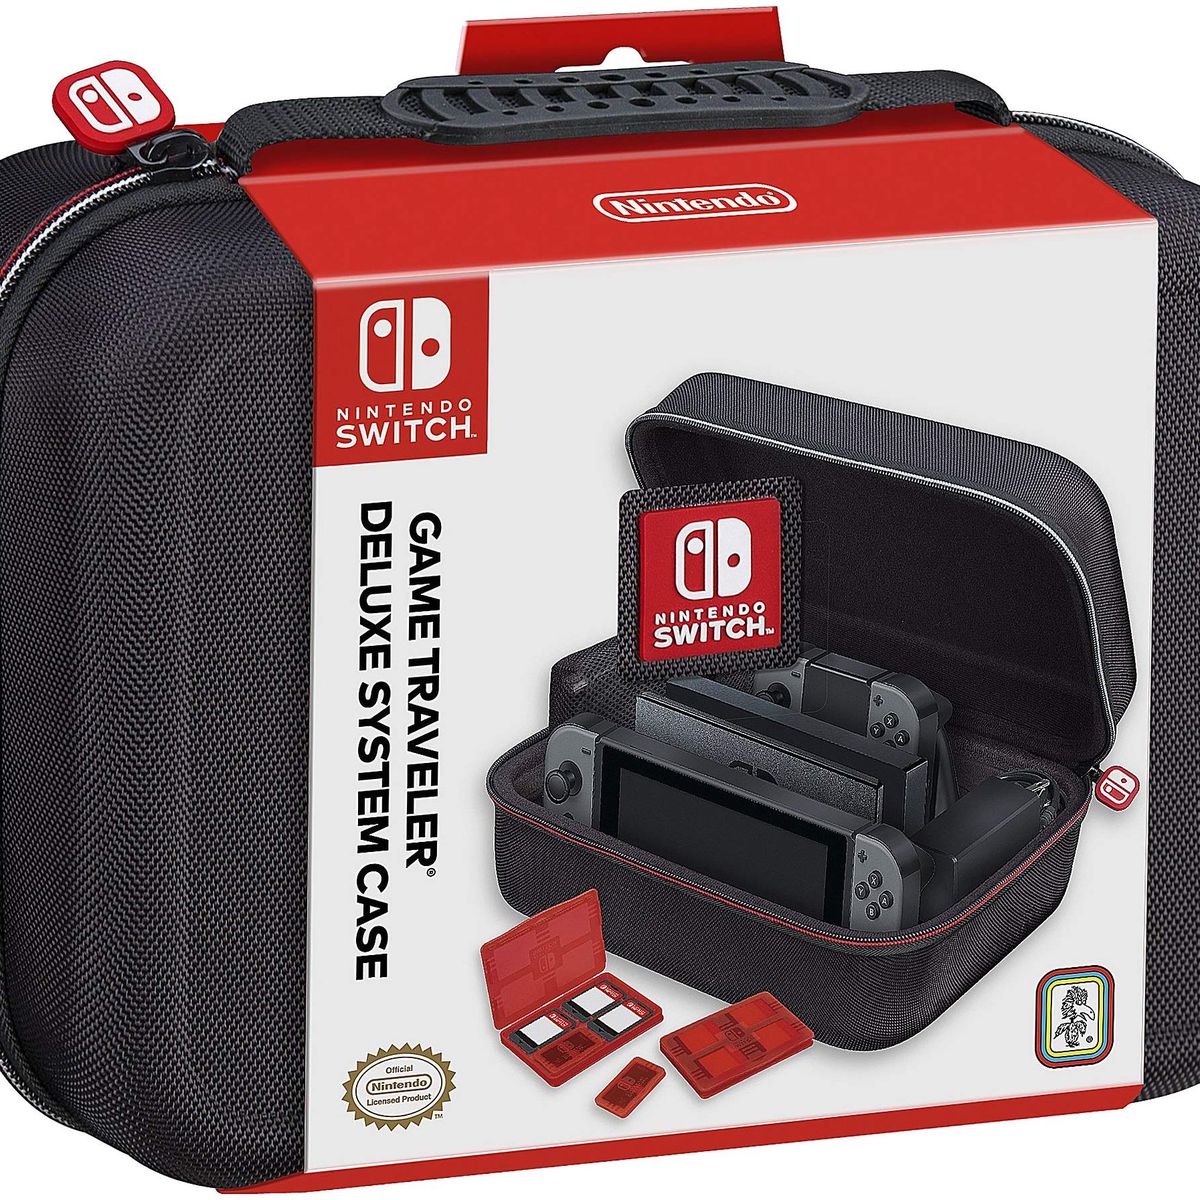 A product shot of the Nintendo Switch System Carrying Case